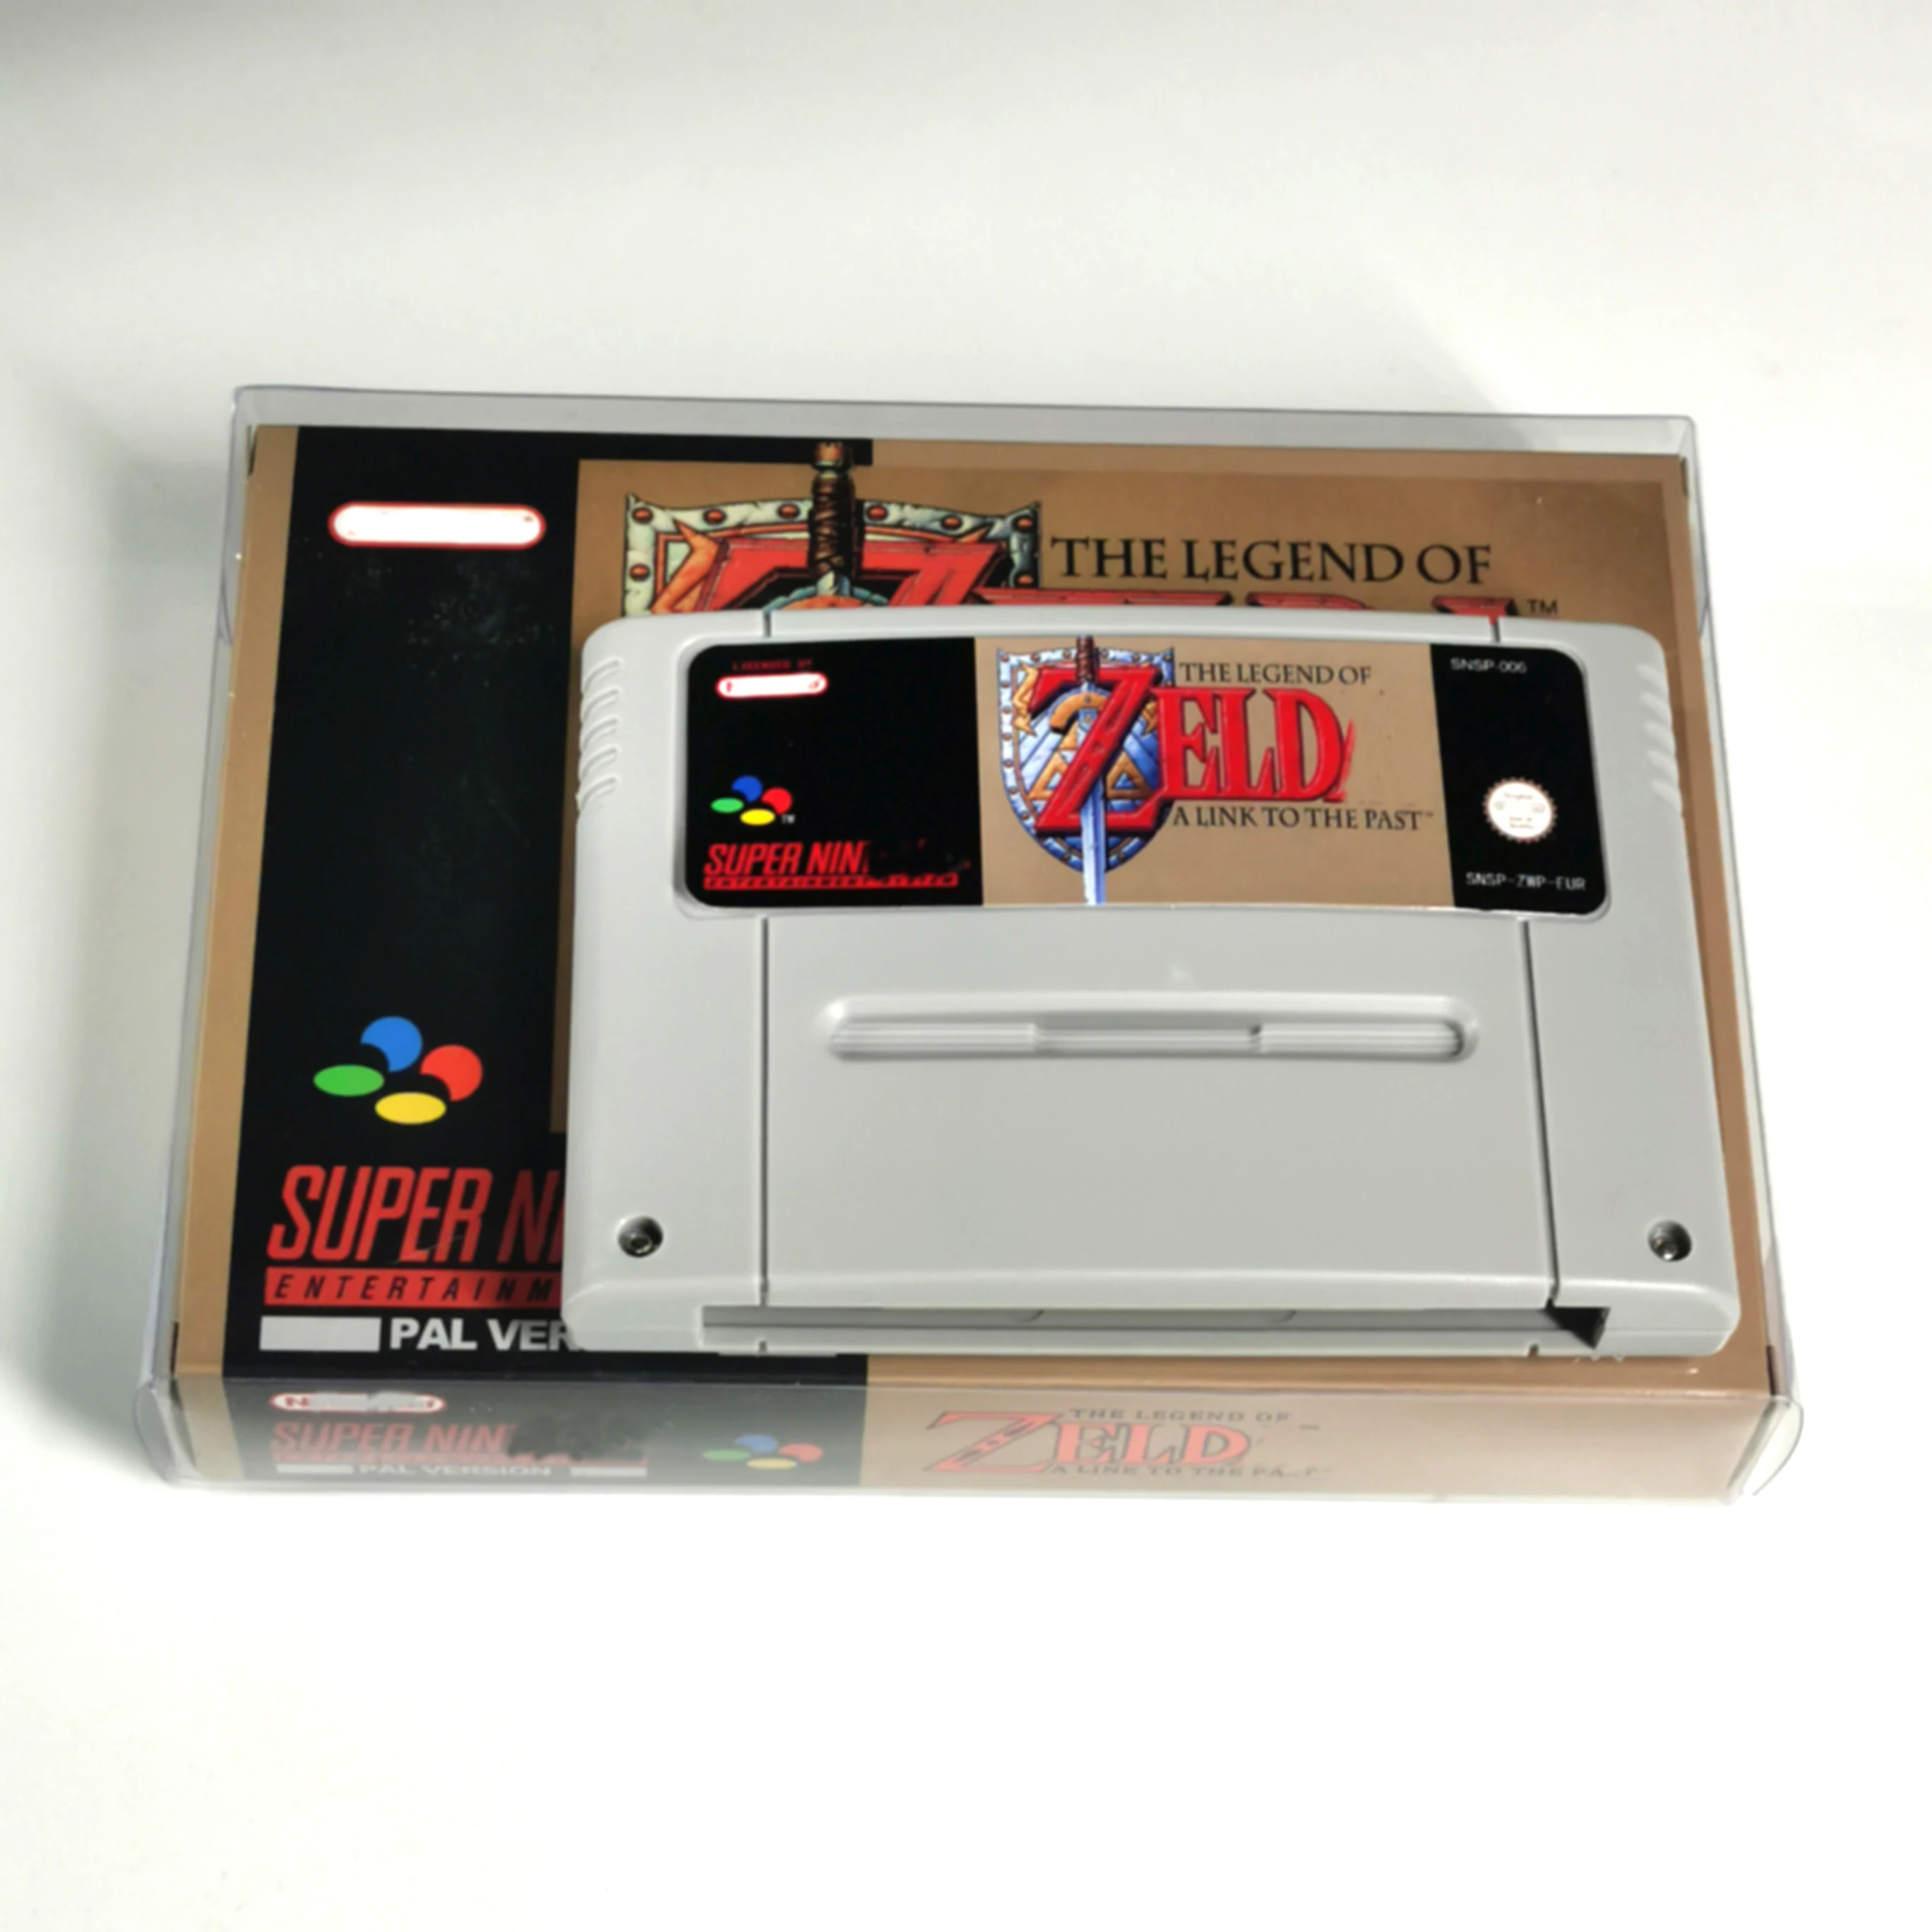 

The Legend of Zeldaed - A Link to the Past - EUR PAL Version Battery Save RPG Game Cartridge With Retail Box For SNES